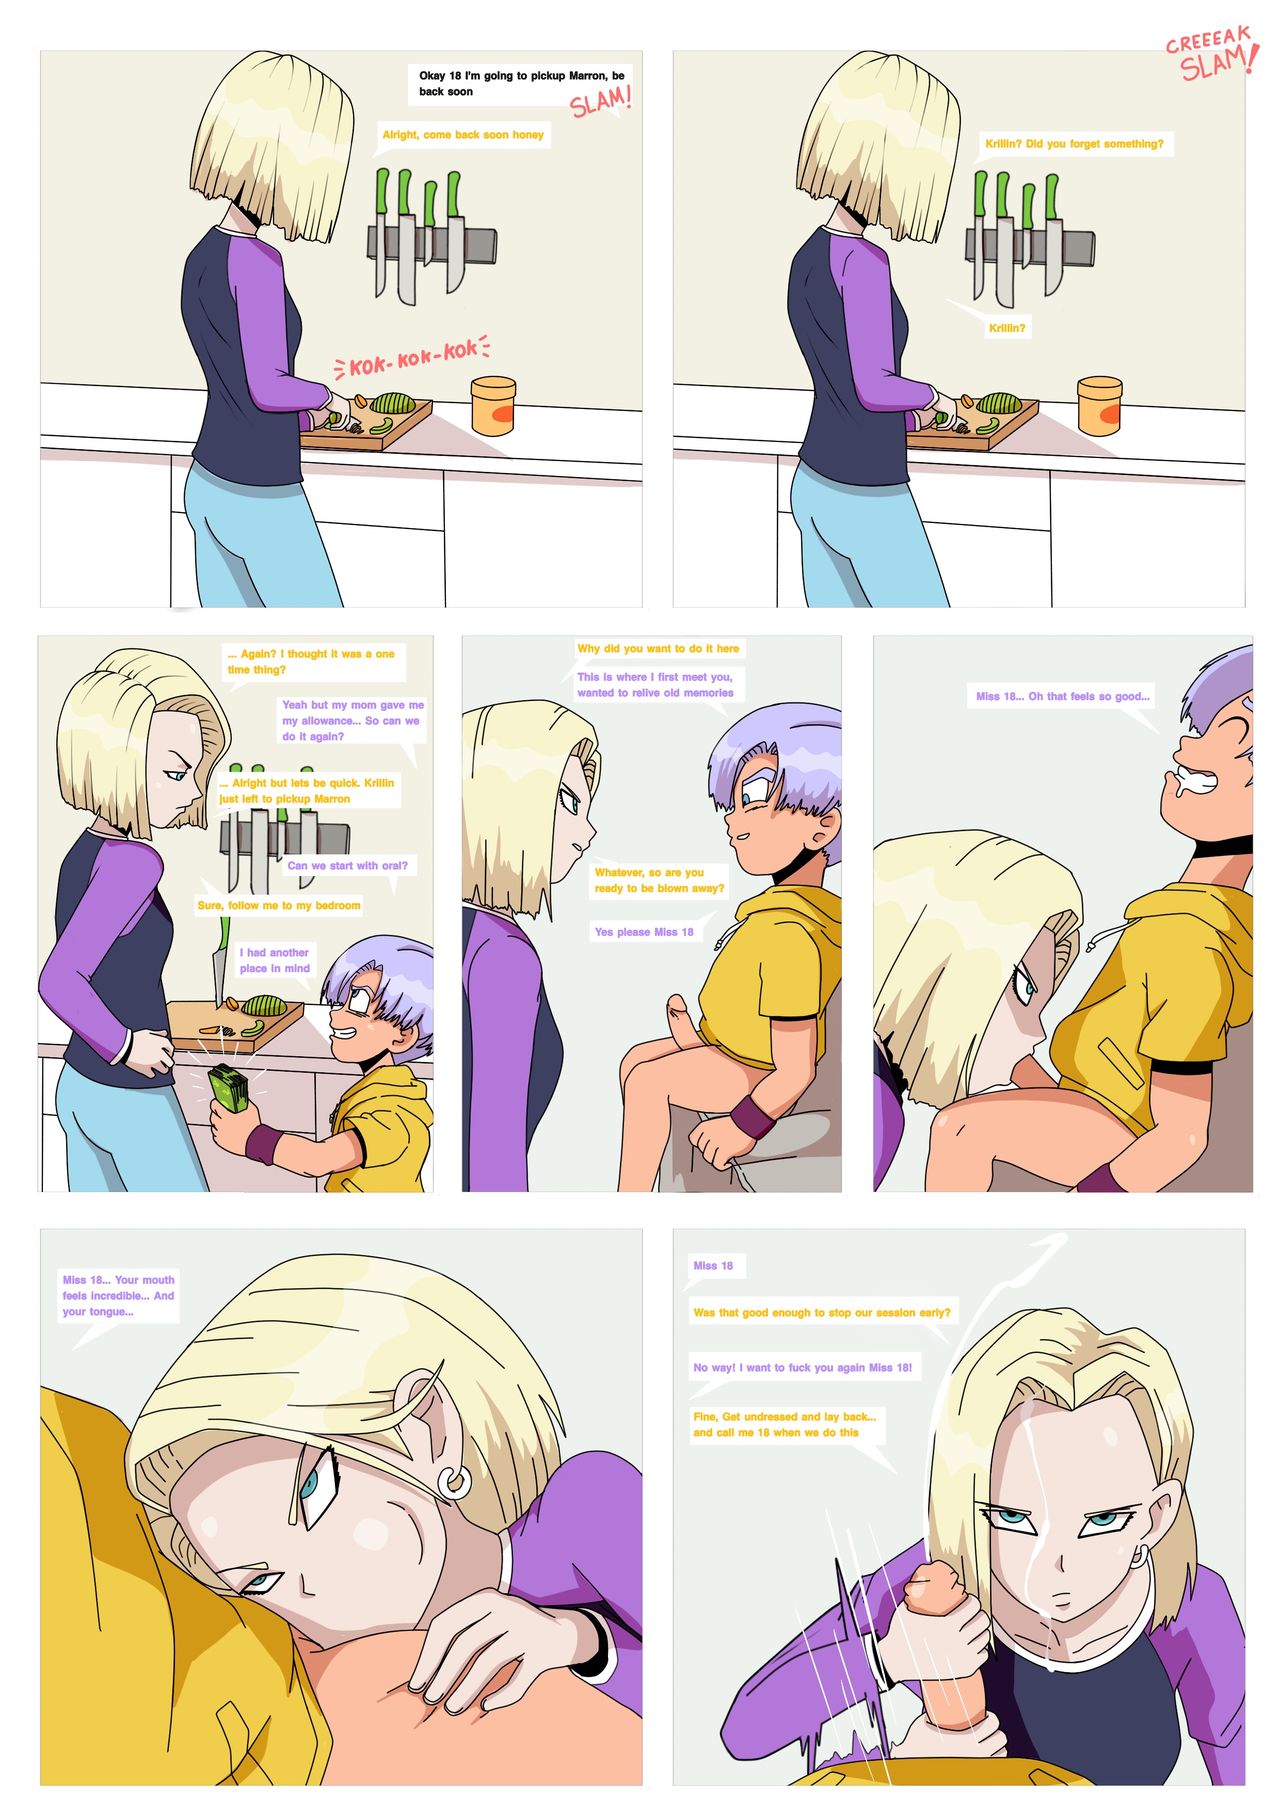 Trunks x Android 18 - Page 1 - Comic Porn XXX